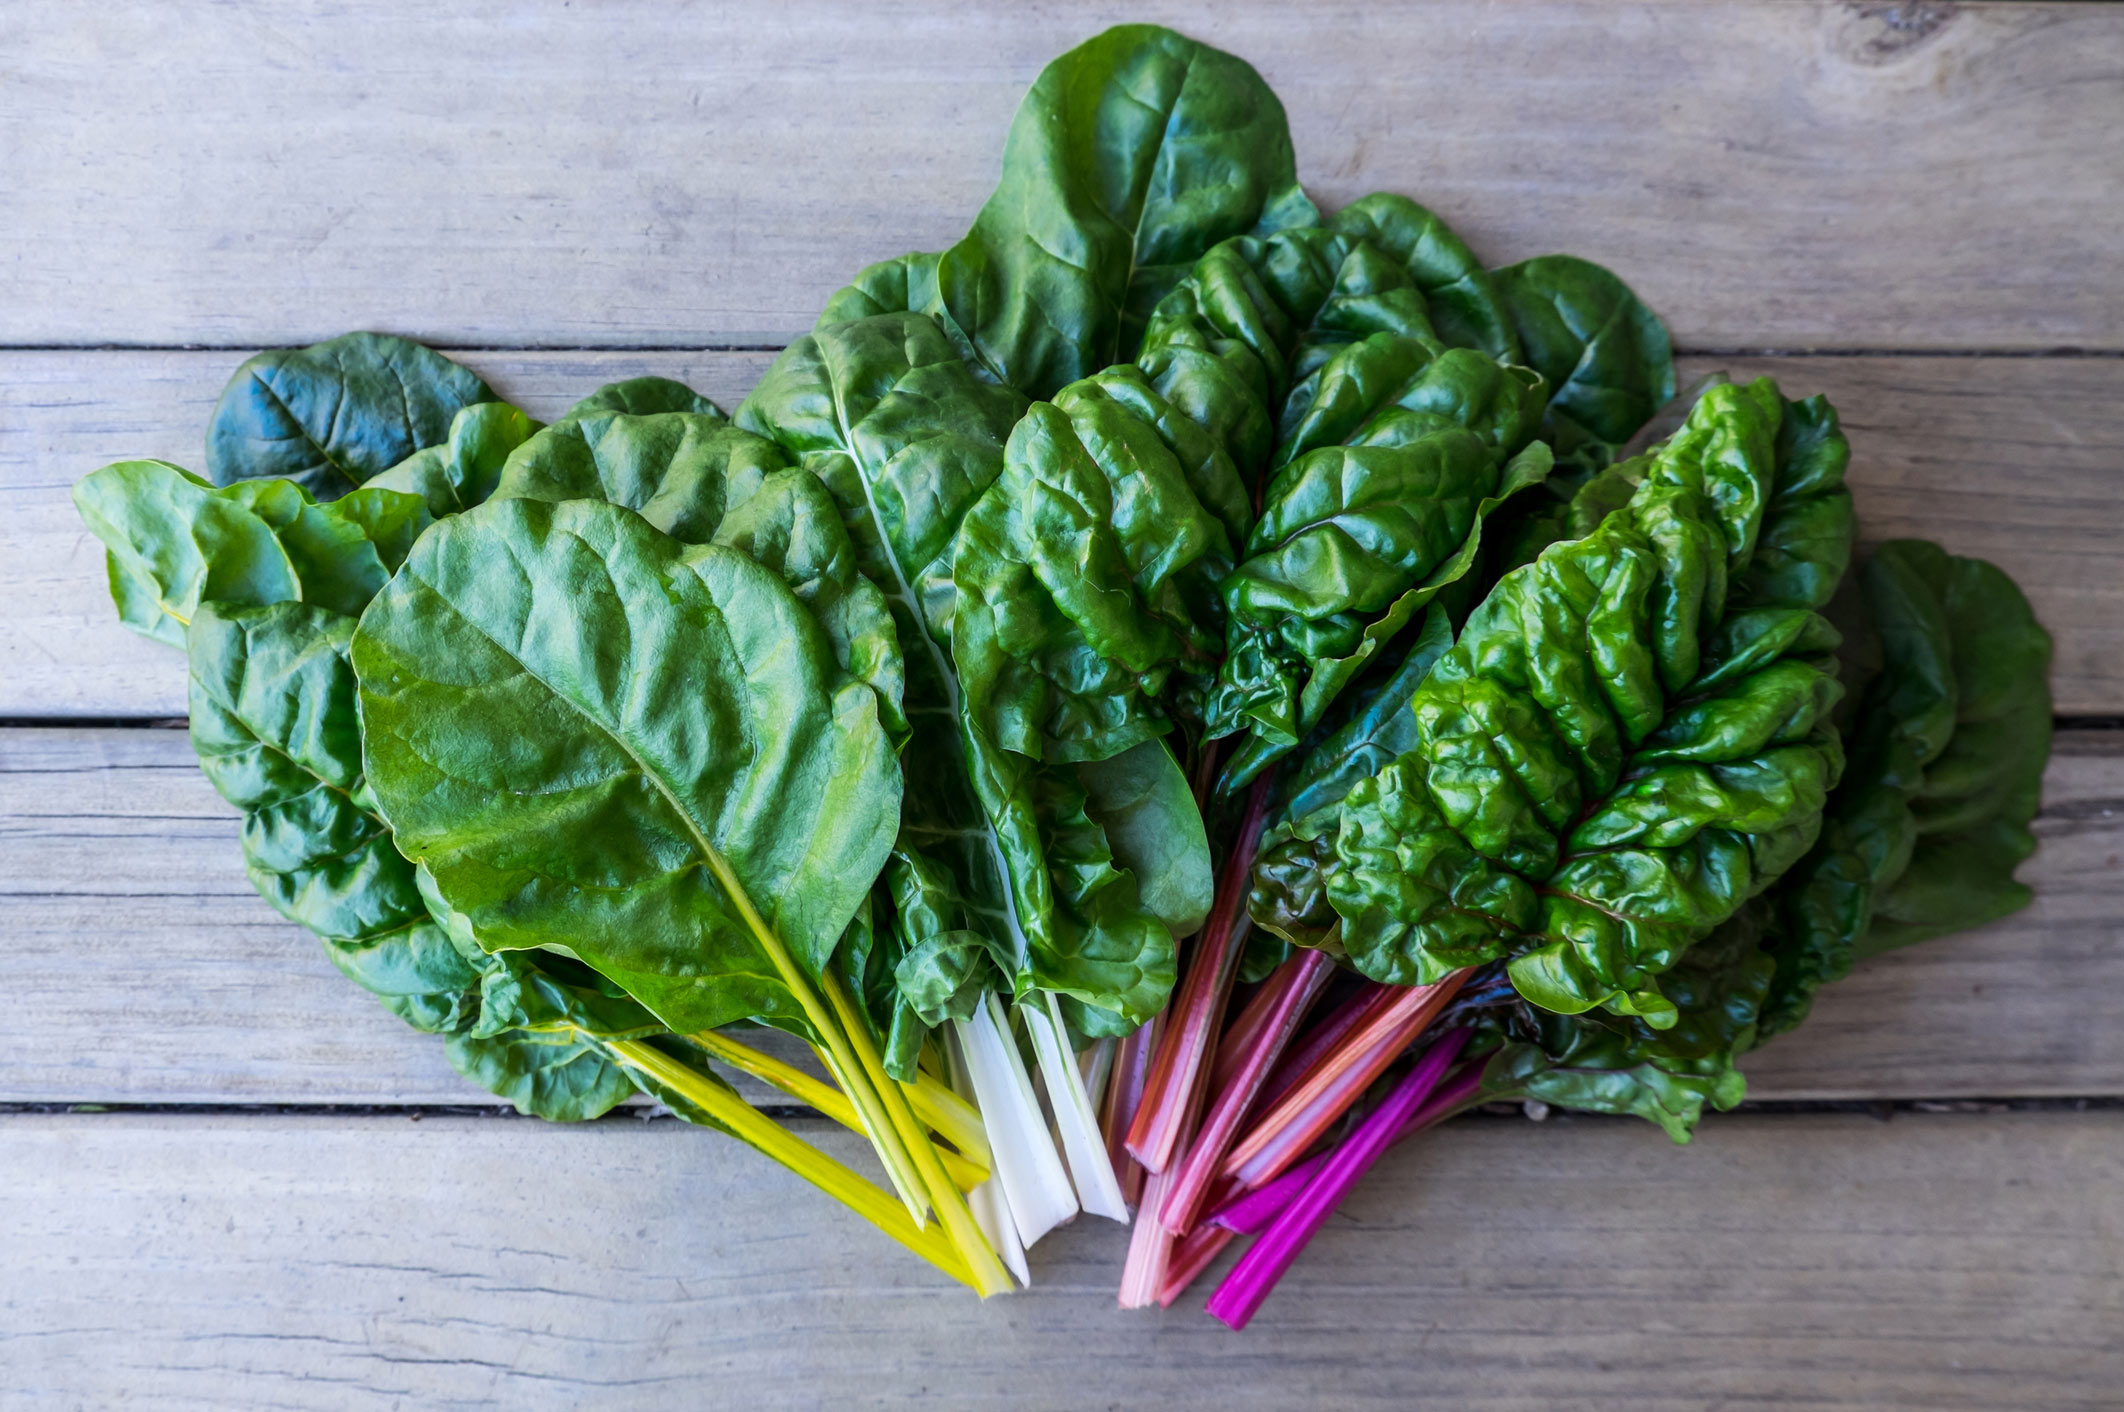 Top heart healthy foods: leafy greens